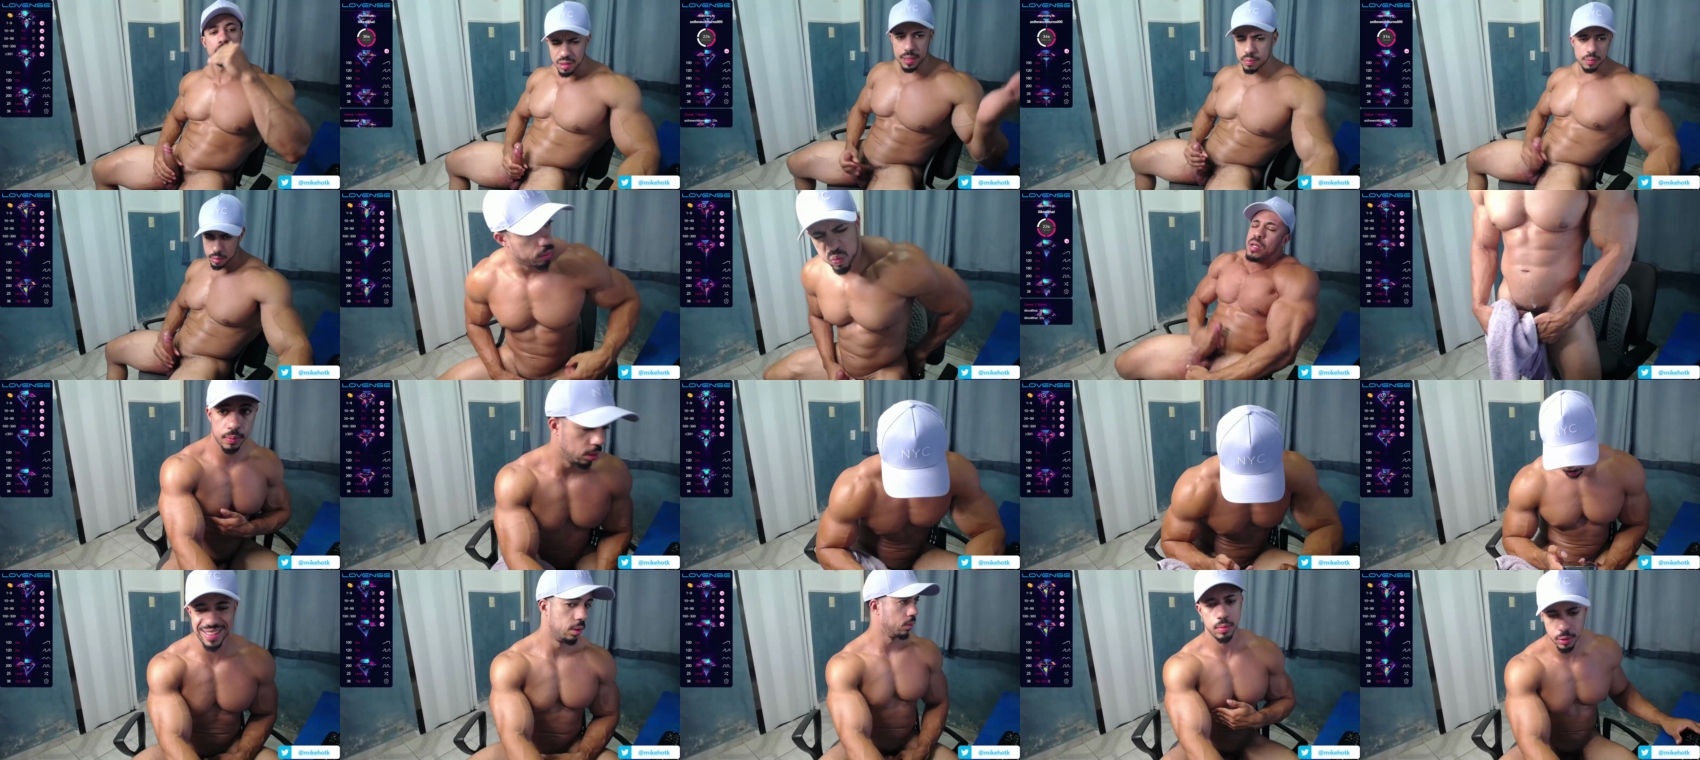 mikehotk play CAM SHOW @ Chaturbate 22-12-2022